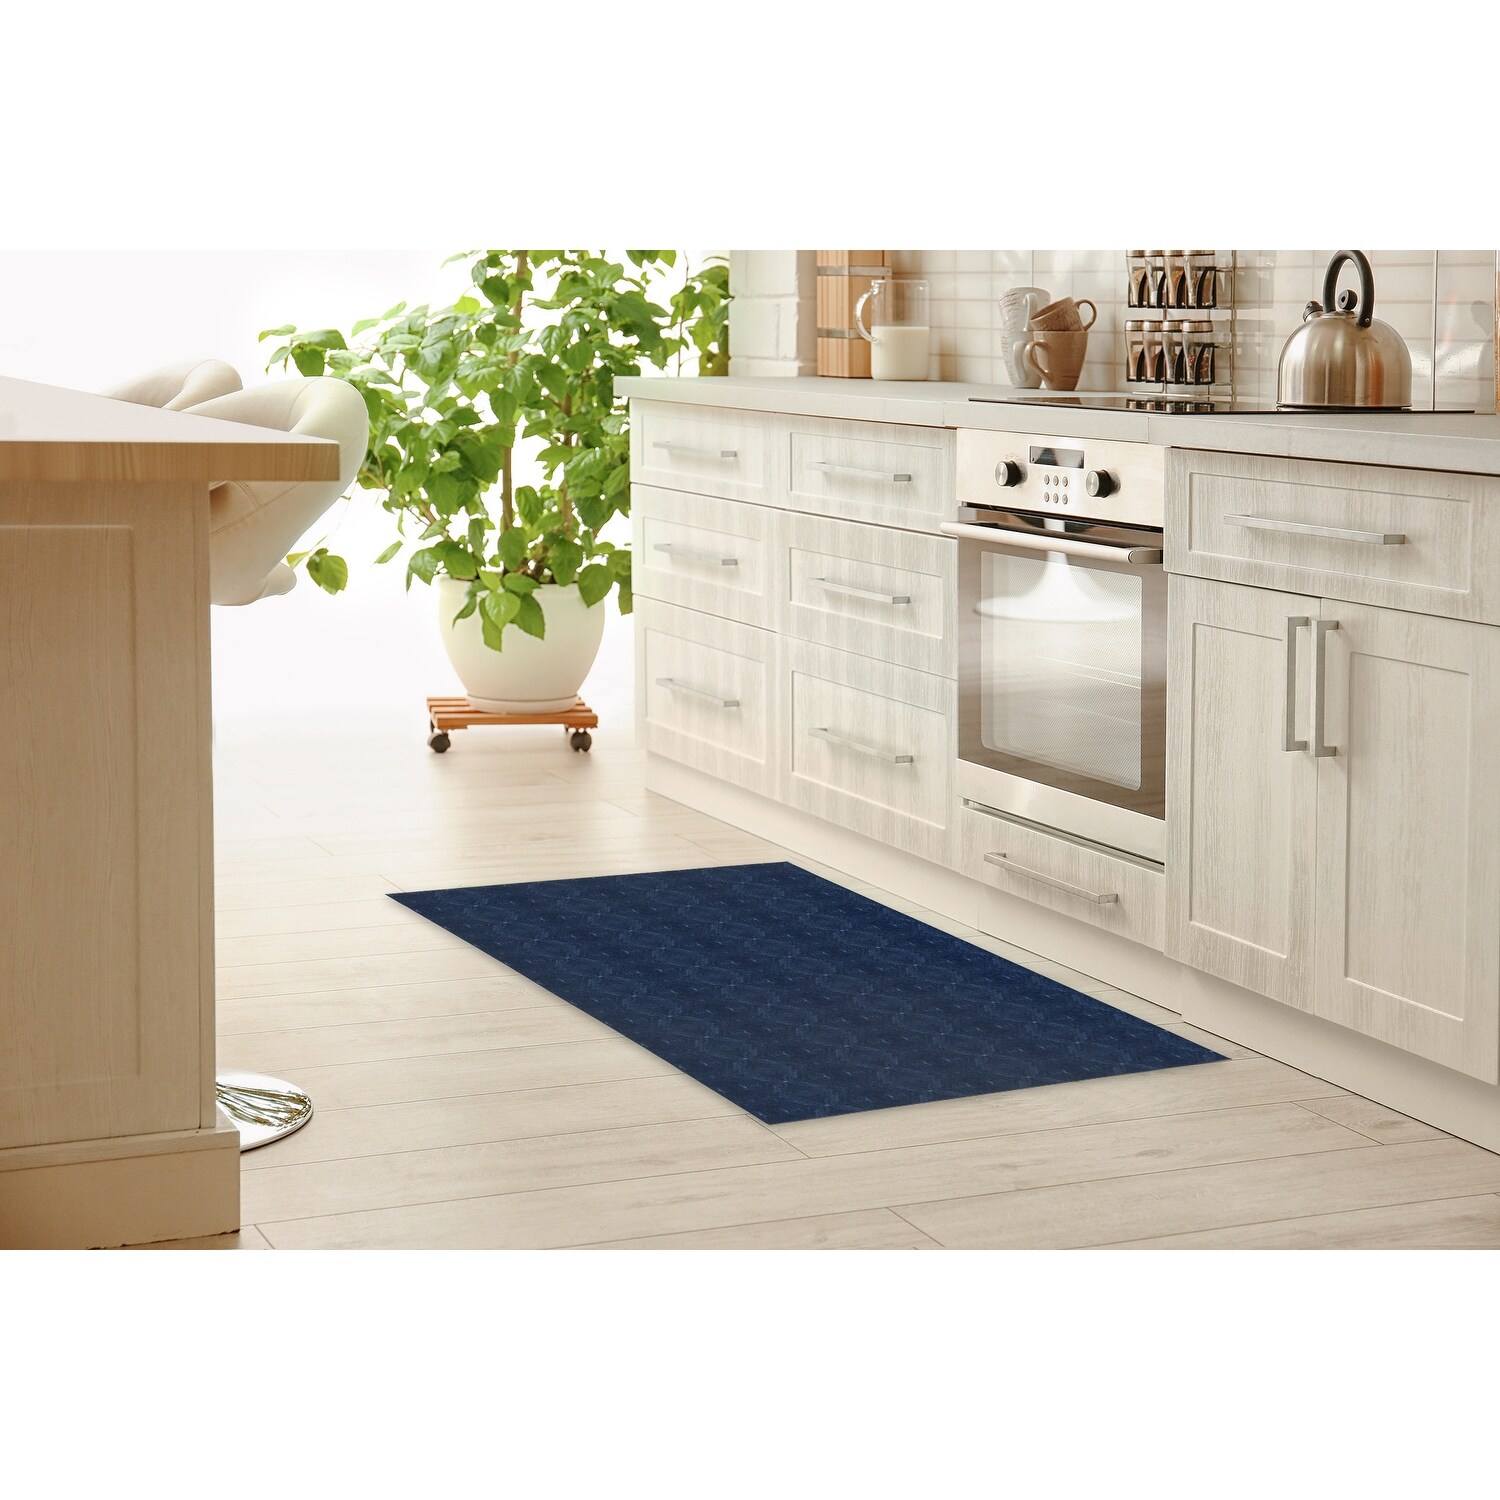 https://ak1.ostkcdn.com/images/products/is/images/direct/b76a6a62fa2e7c3906ee5cf30d5a03abeff7cc62/DELPHI-BLUE-Kitchen-Mat-By-Michelle-Parascandolo.jpg